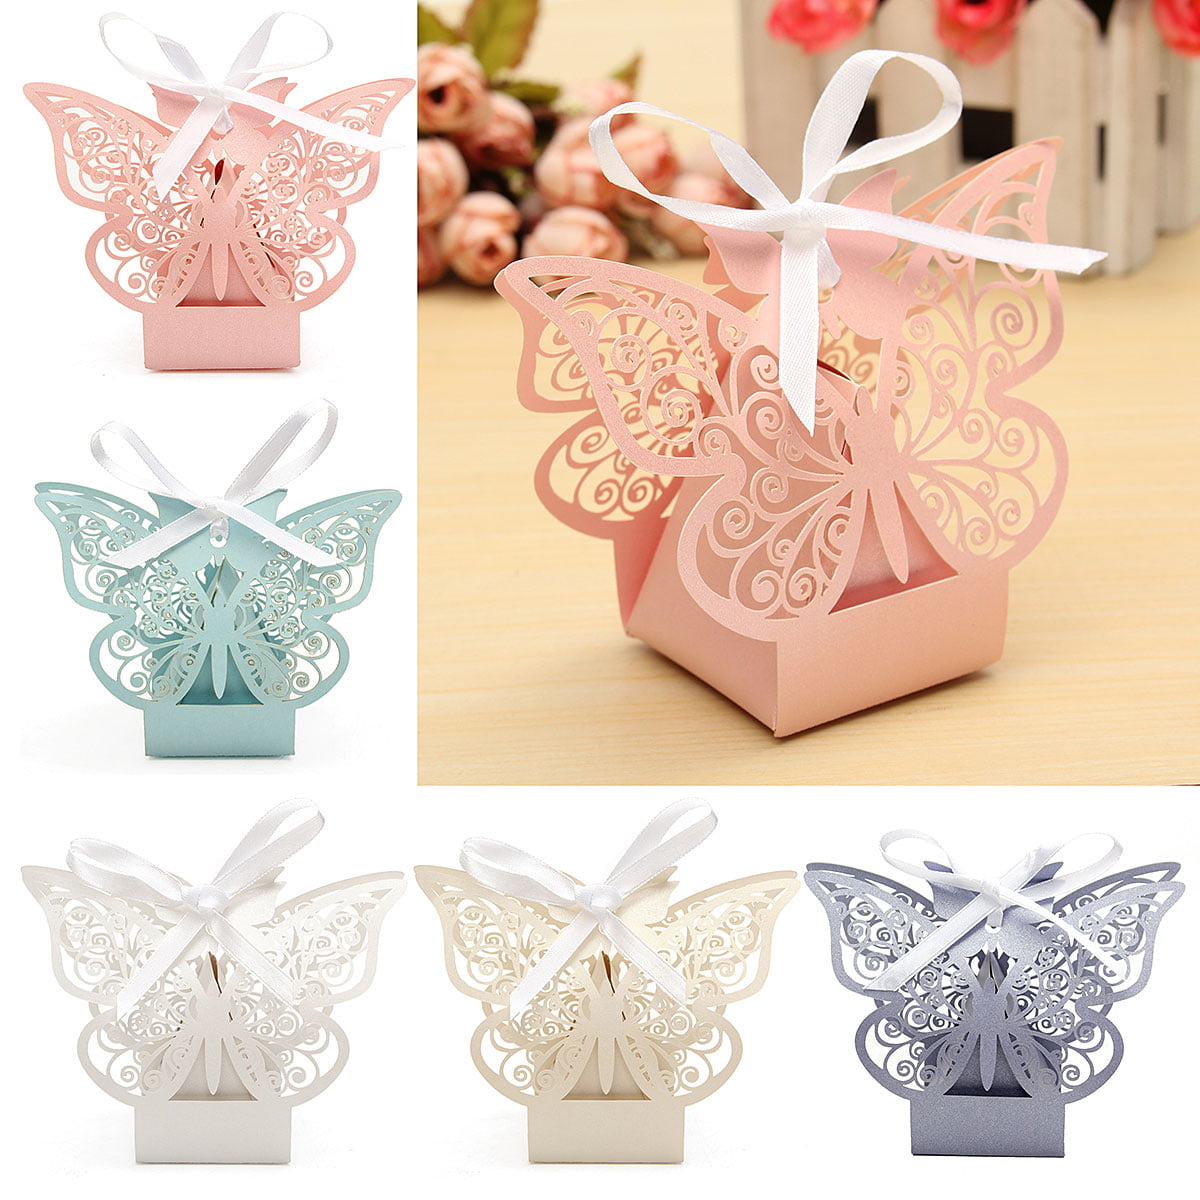 10pcs Pillow Paper Candy Box Wedding Favors Baby Party Bread Gift Bags 